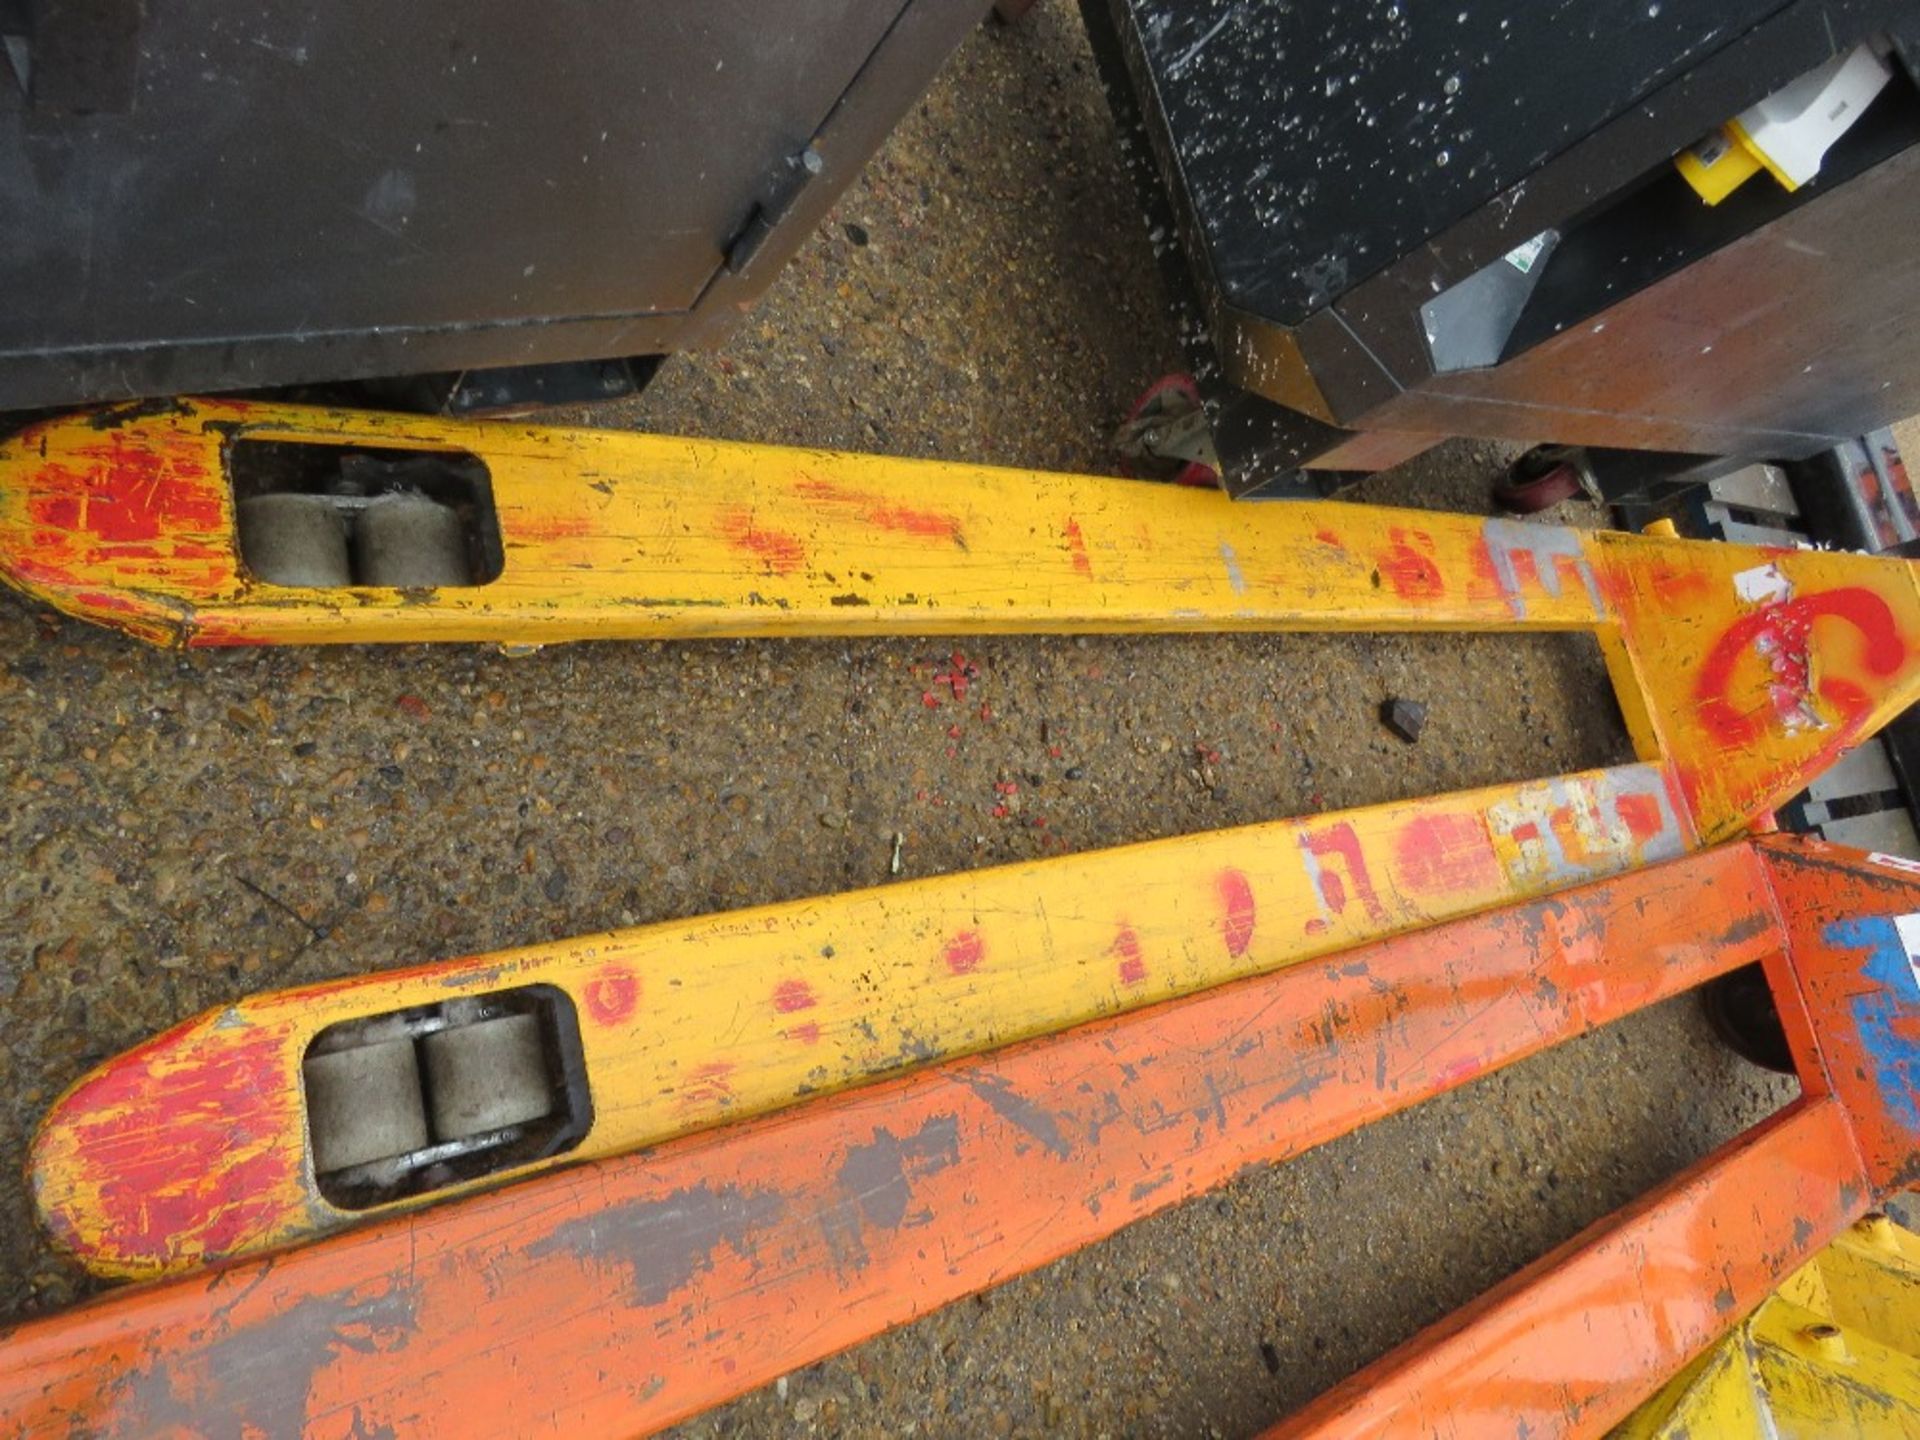 1 X PALLET TRUCK, 2.50 LENGTH BLADES. SOURCED FROM LARGE CONSTRUCTION COMPANY LIQUIDATION. - Image 2 of 4